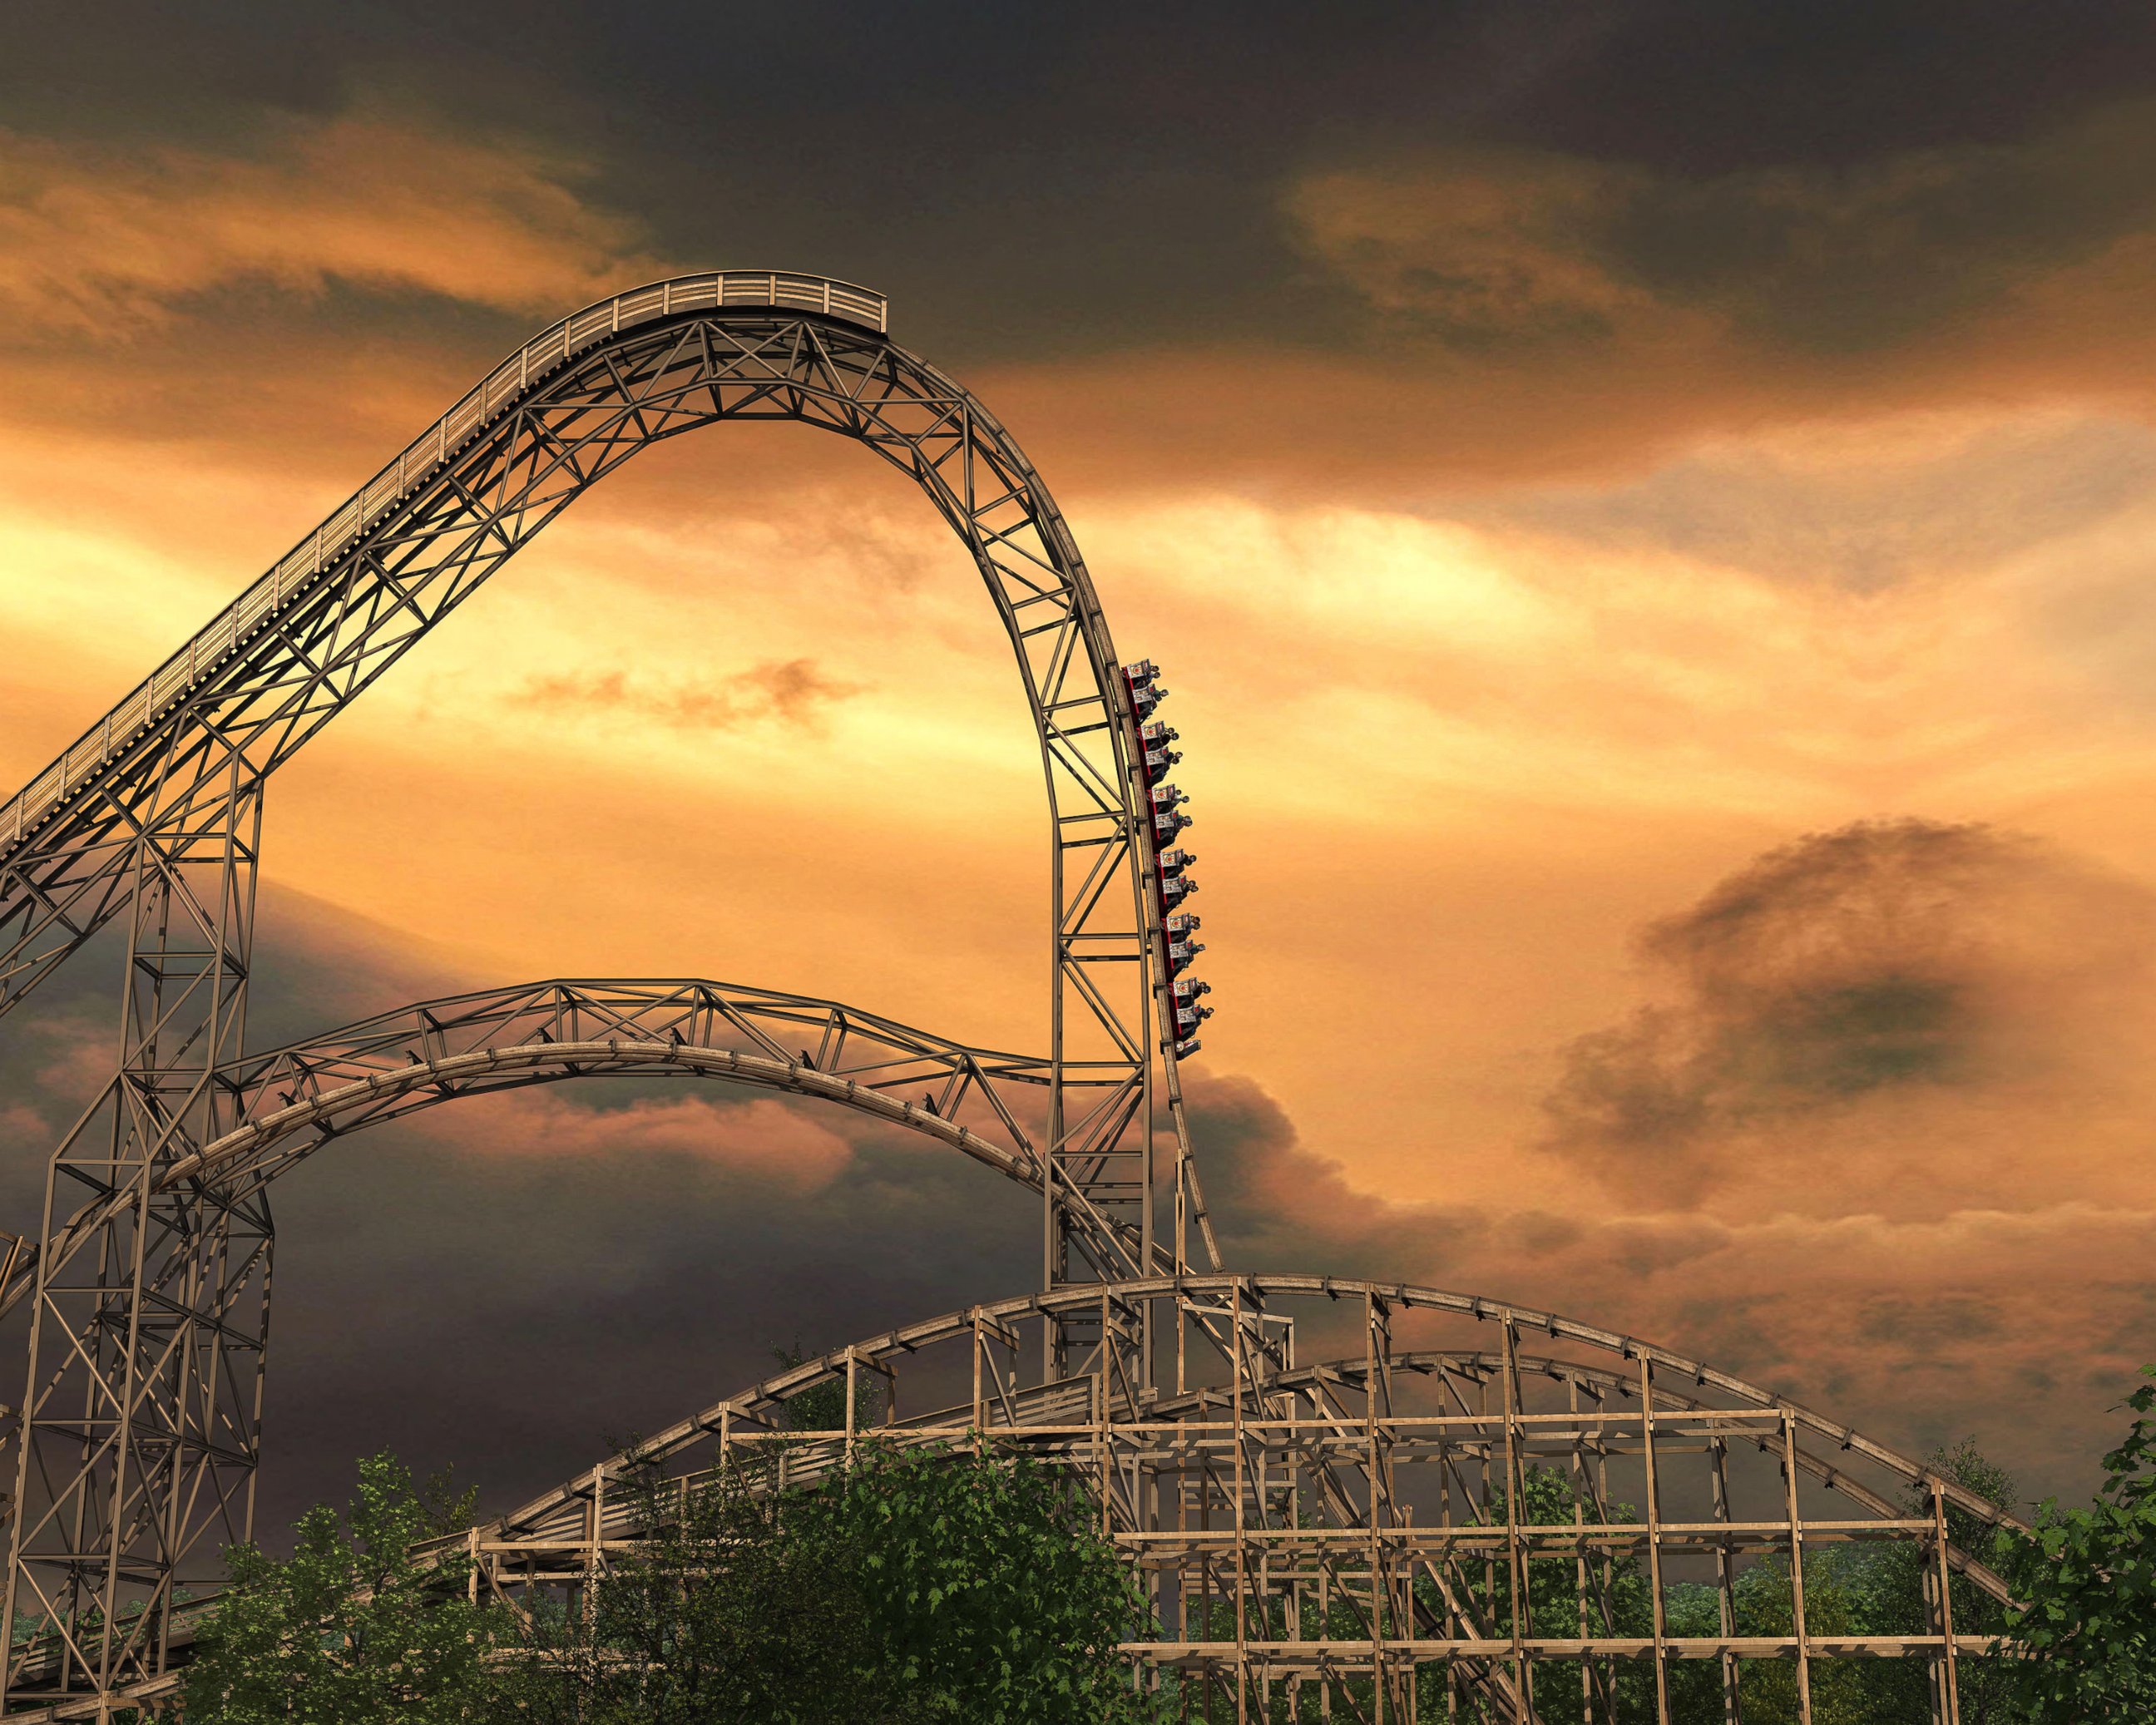 PHOTO: A rendering of Goliath, scheduled to open June 2014 at Six Flags Great America in Gurnee, Ill.